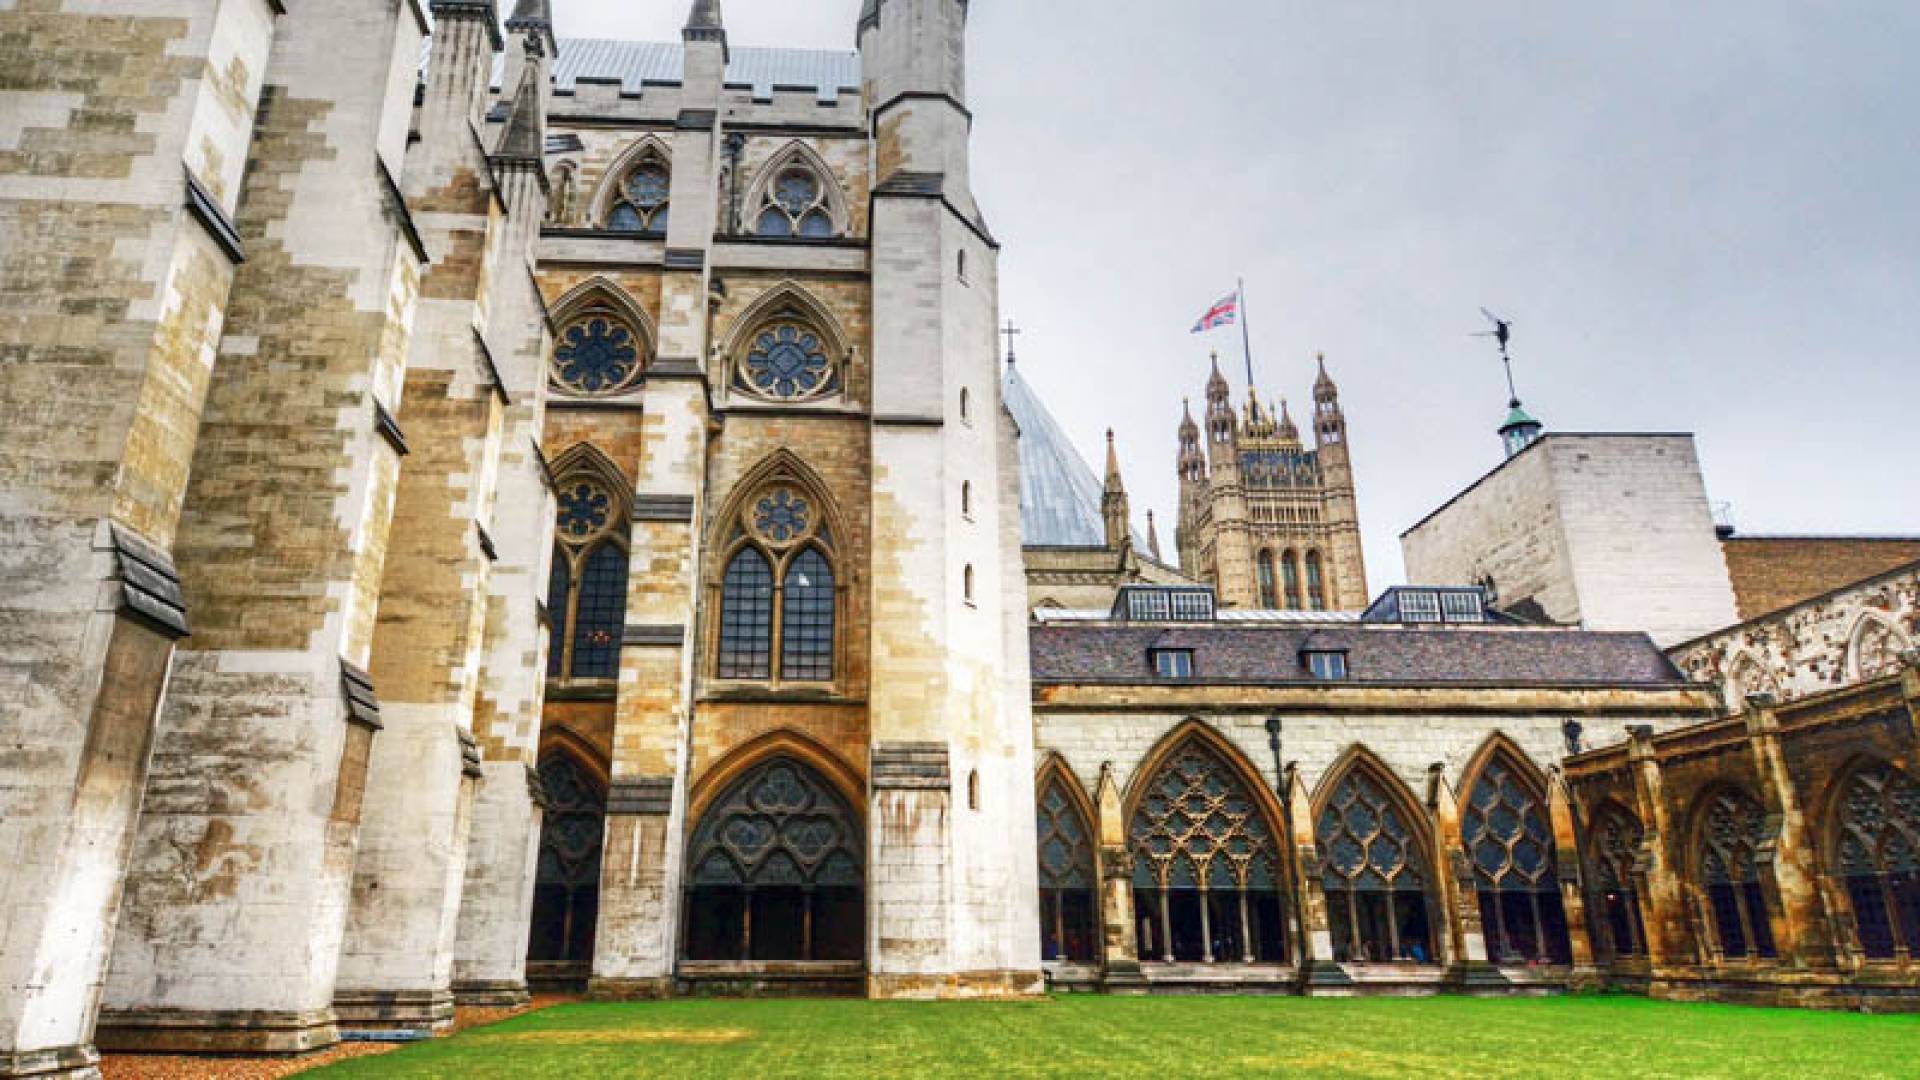 WESTMINSTER ABBEY, Convento